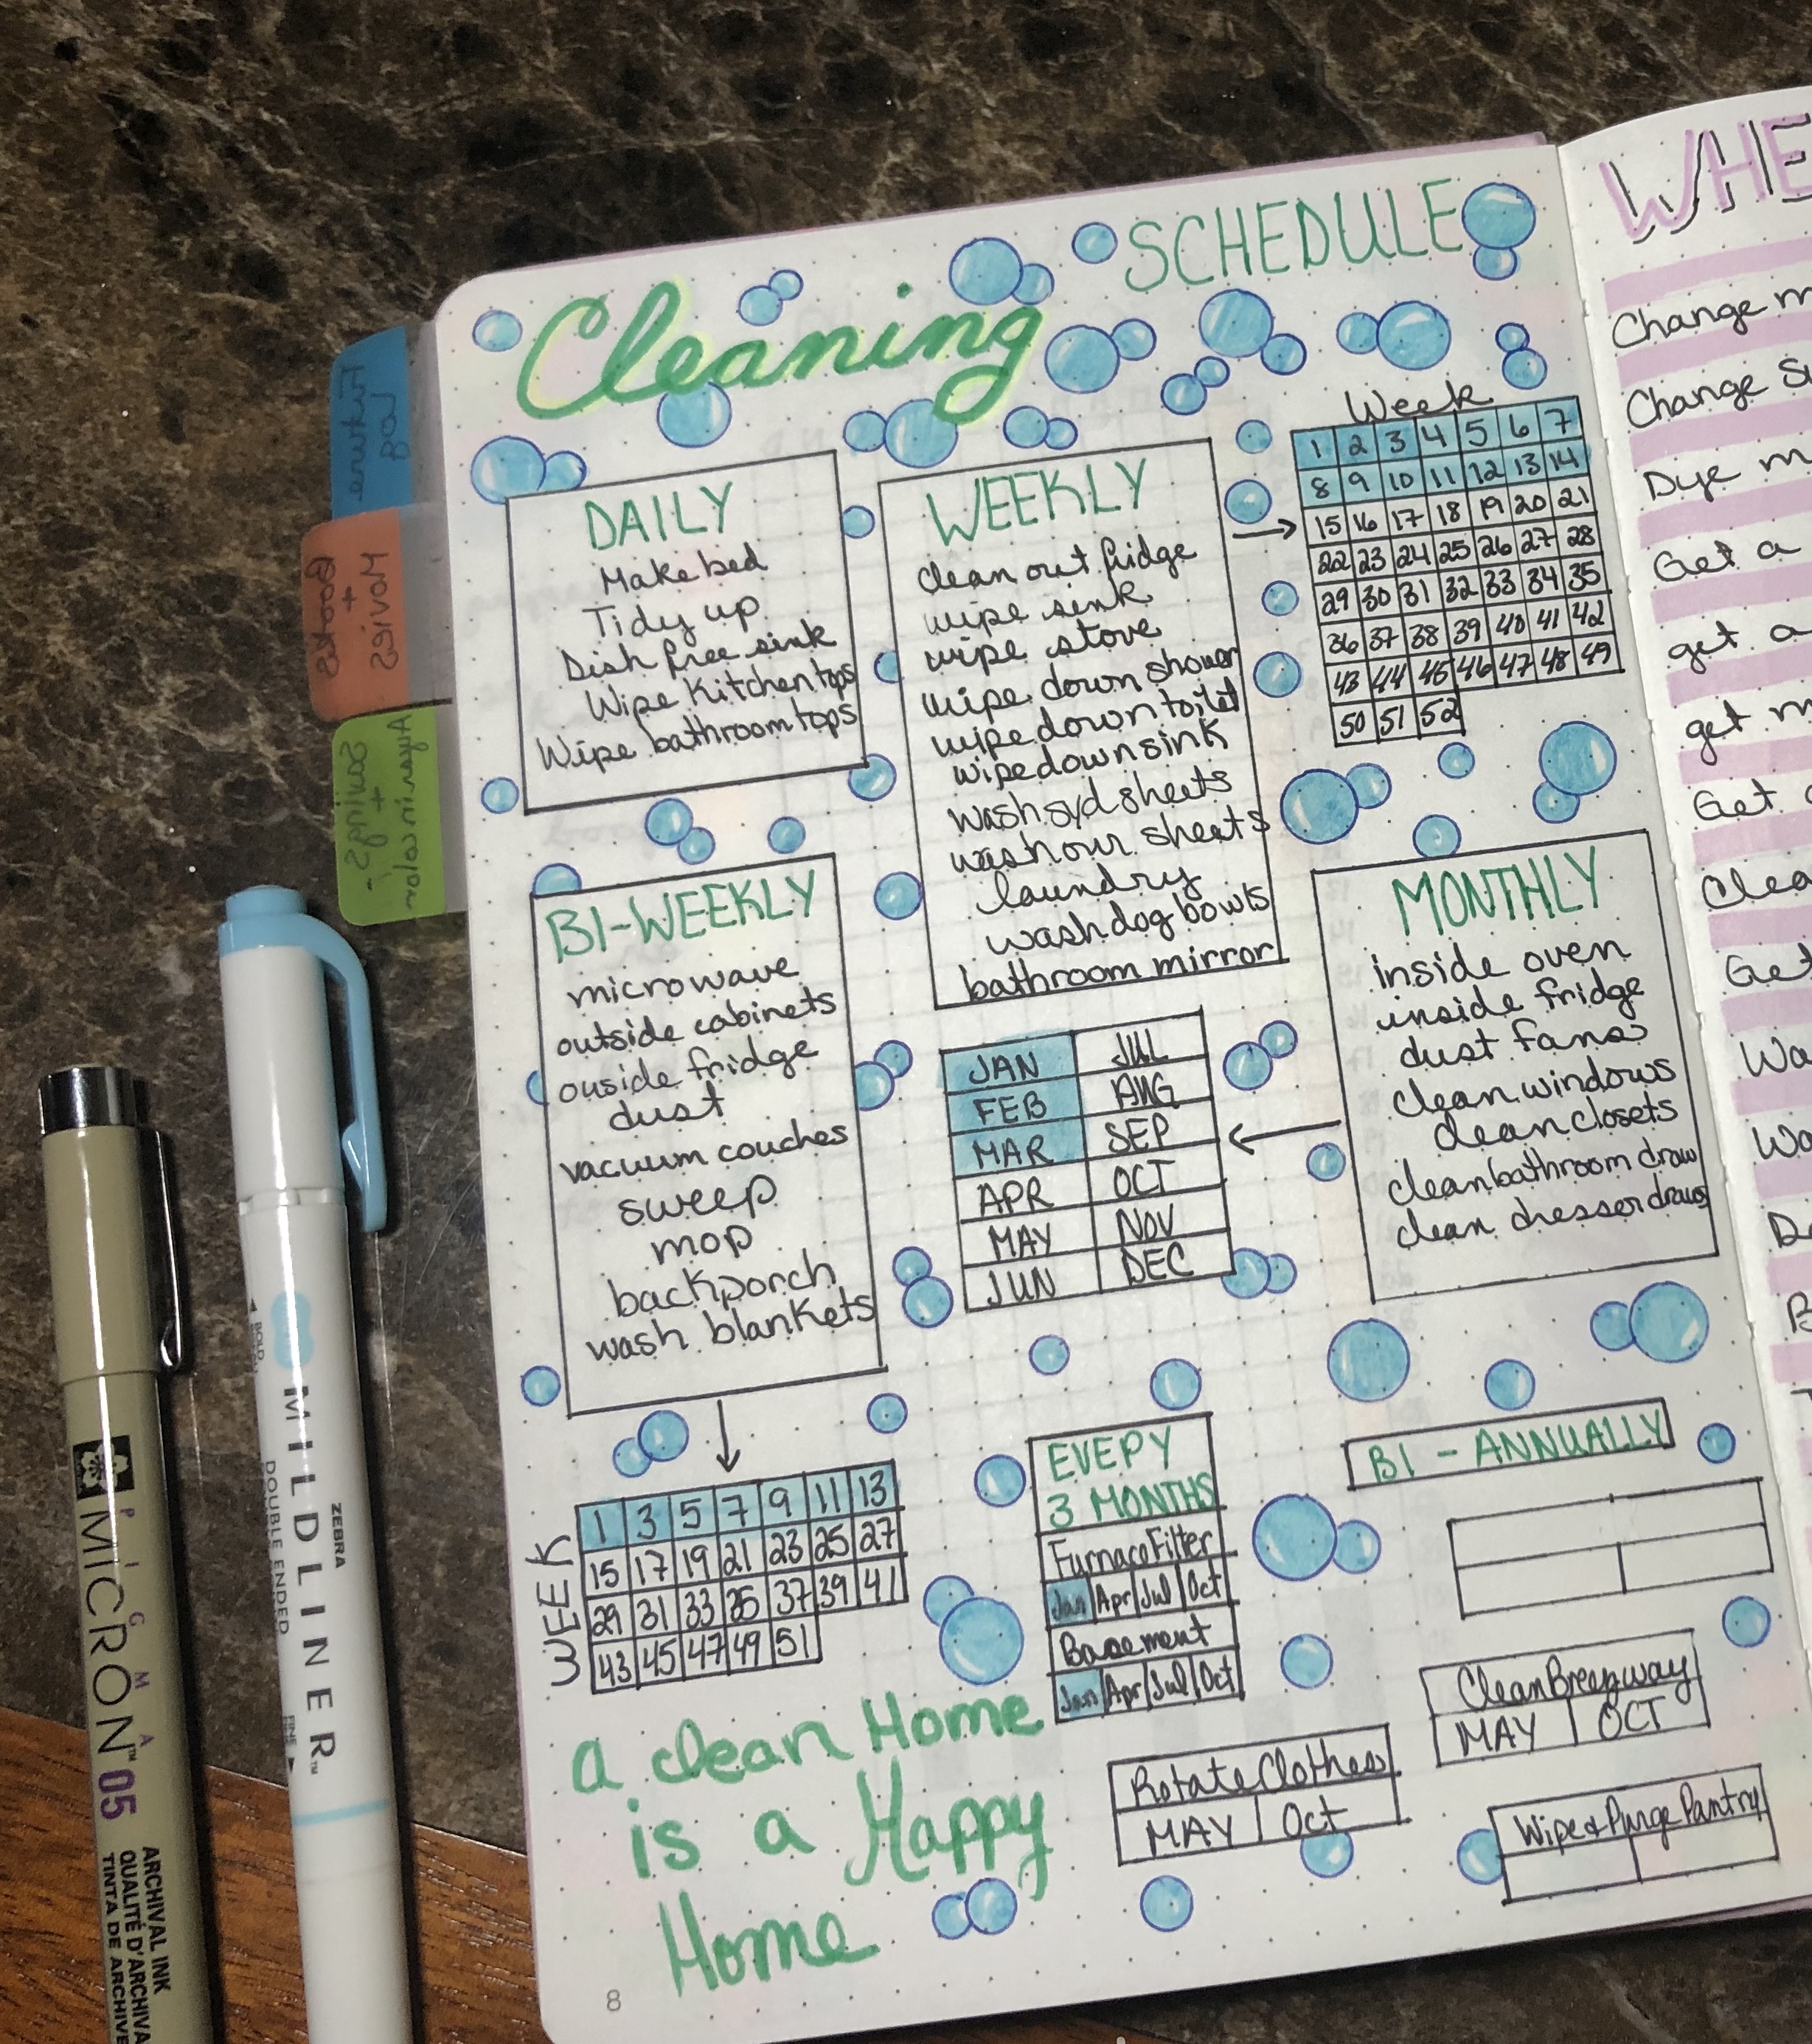 at a glance cleaning schedule with awesome bubbles super cute for bullet journal layout